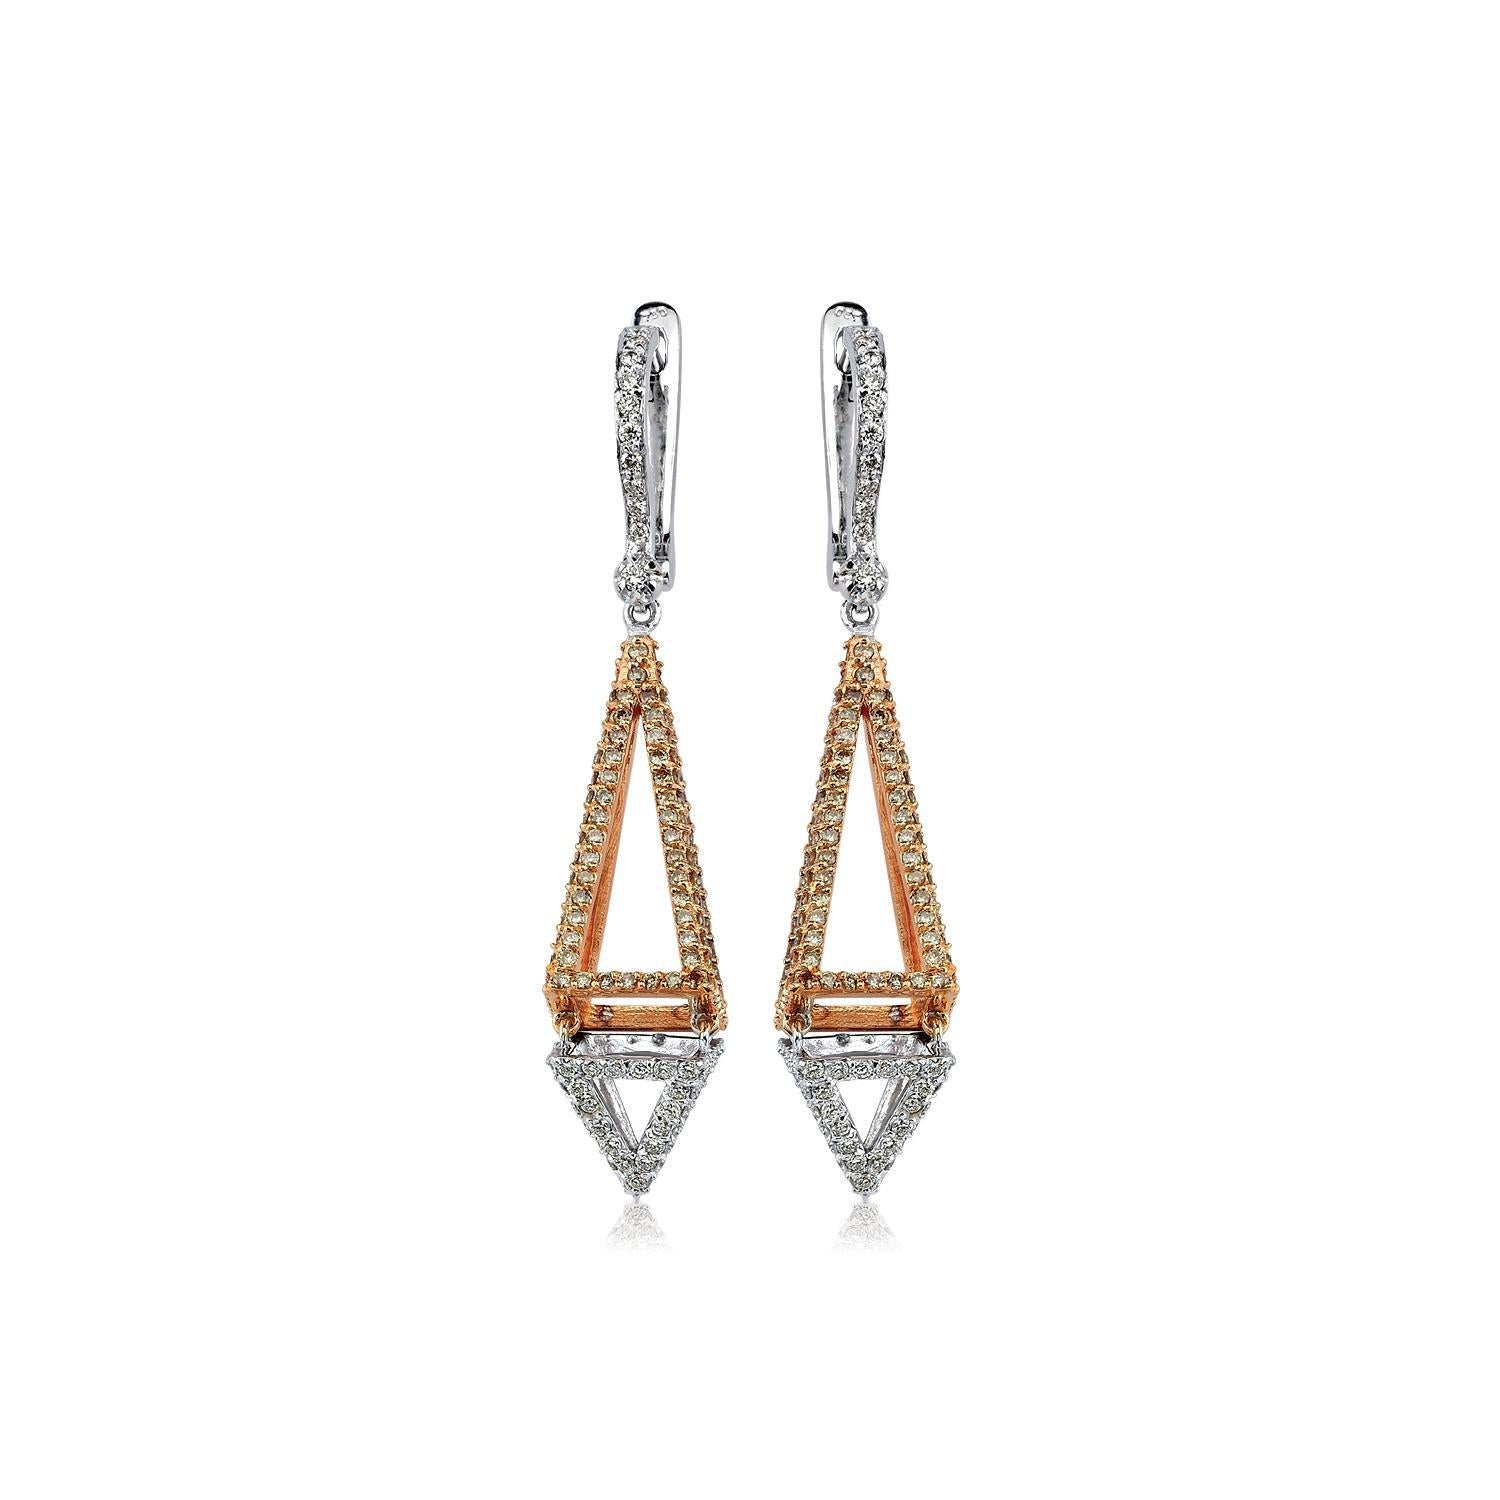 New Forms, by Emre Osmanlar, is a sophisticated exploration of geometry through jewellery.
Classic forms give way to new ones as curves, links and pivots emerge adding unusual dimensions and fluidity to create fascinating new shapes.
Like much of